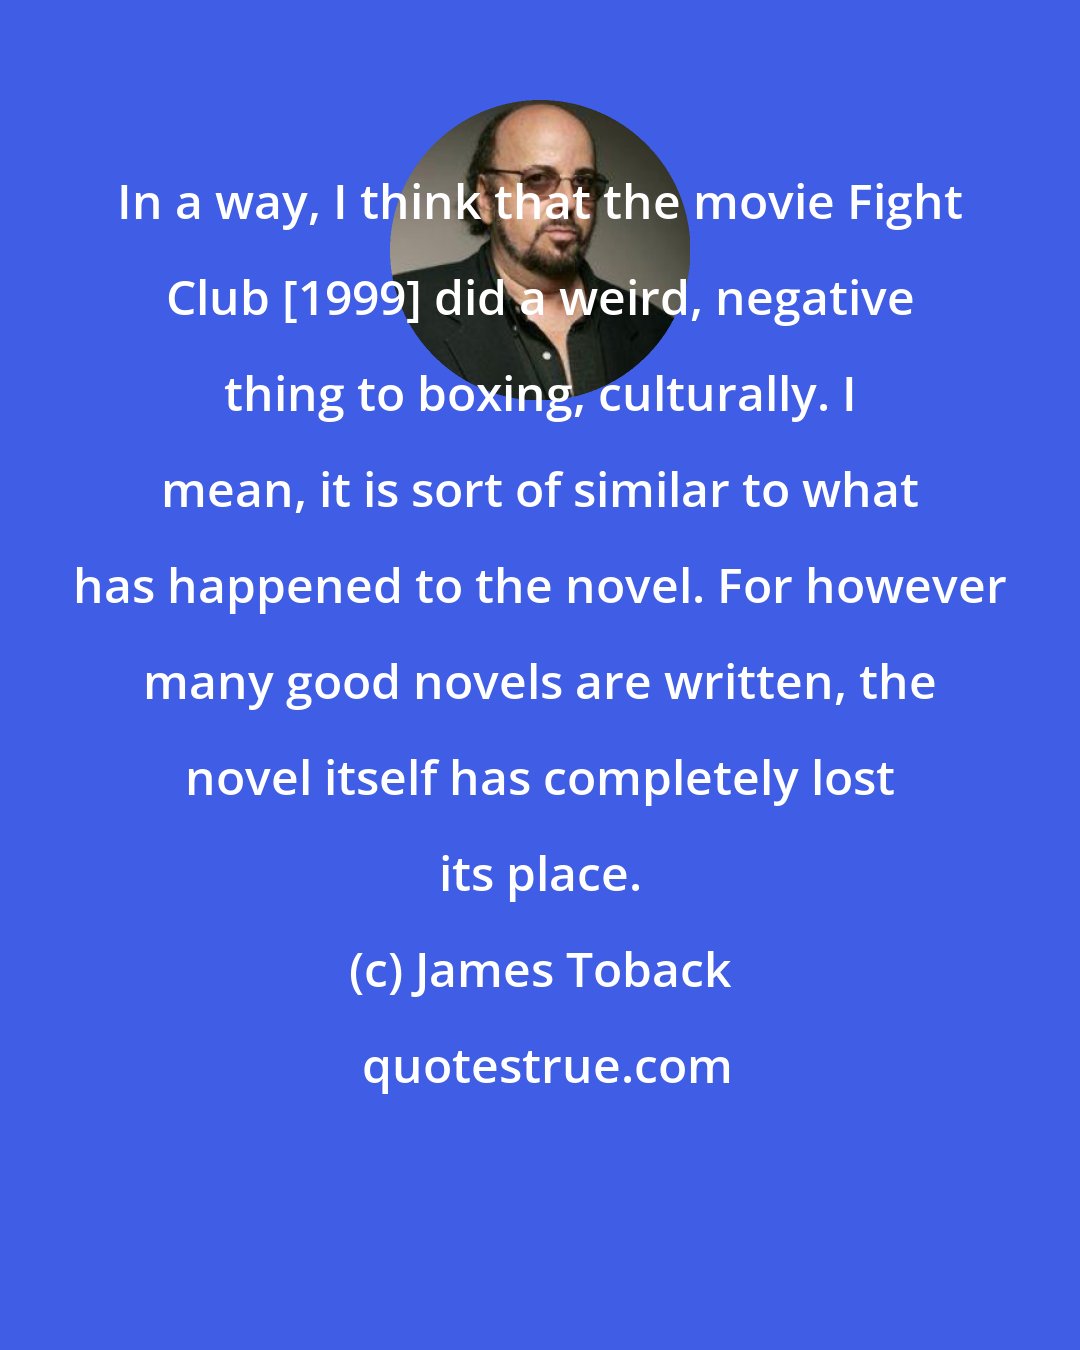 James Toback: In a way, I think that the movie Fight Club [1999] did a weird, negative thing to boxing, culturally. I mean, it is sort of similar to what has happened to the novel. For however many good novels are written, the novel itself has completely lost its place.